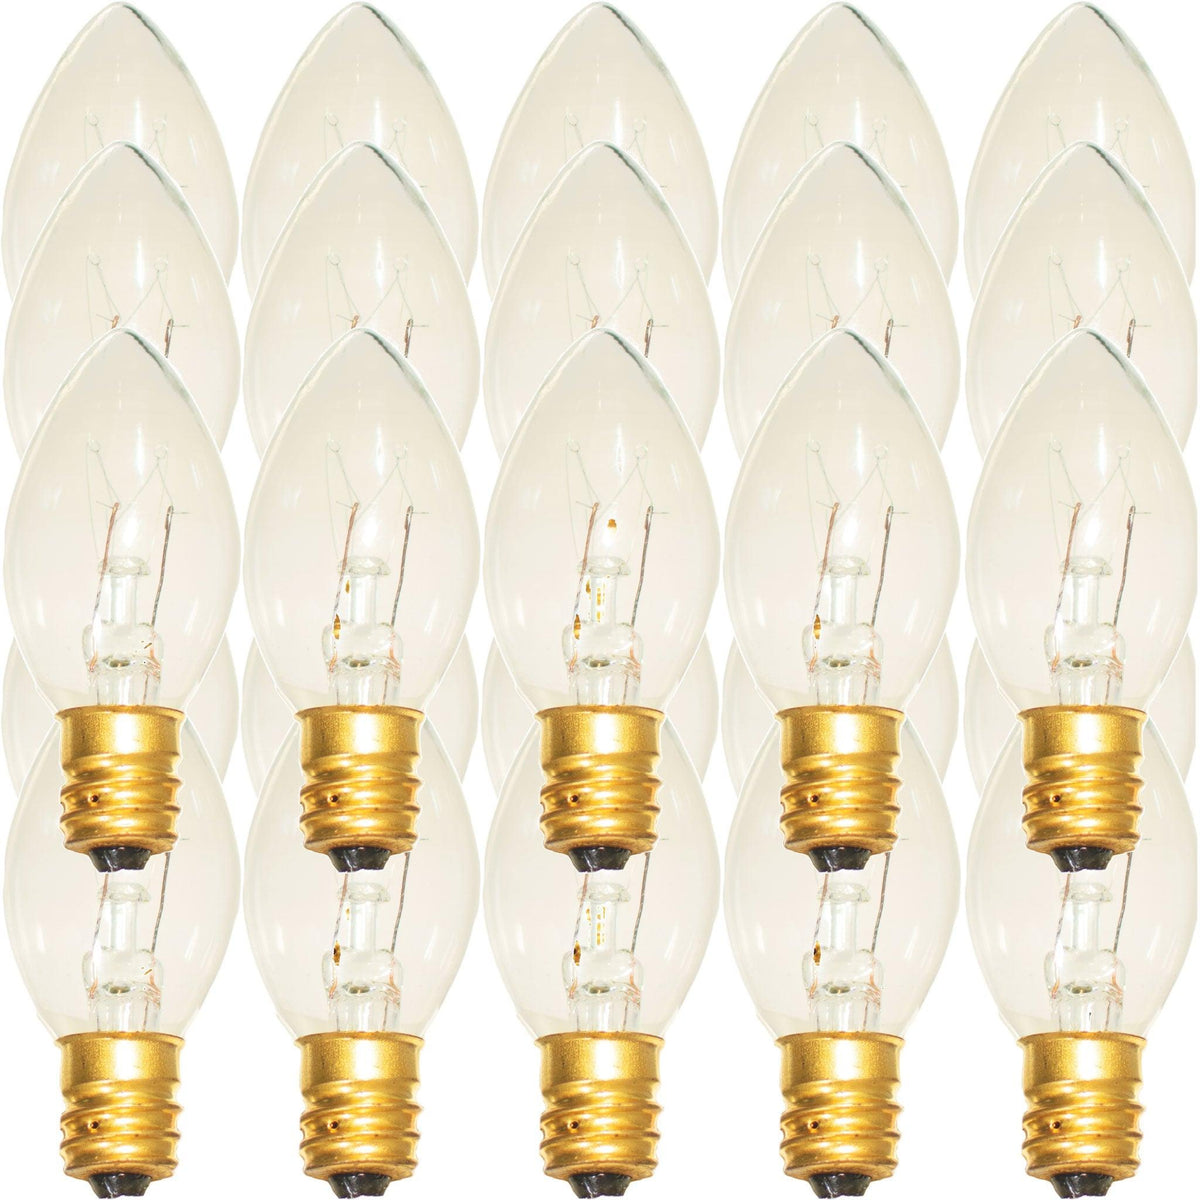 C-7 & C-9 Clear Christmas Light Bulbs. Replace your old bulbs with a set of brand new Candelabra Lights. On sale at leedisplay.com